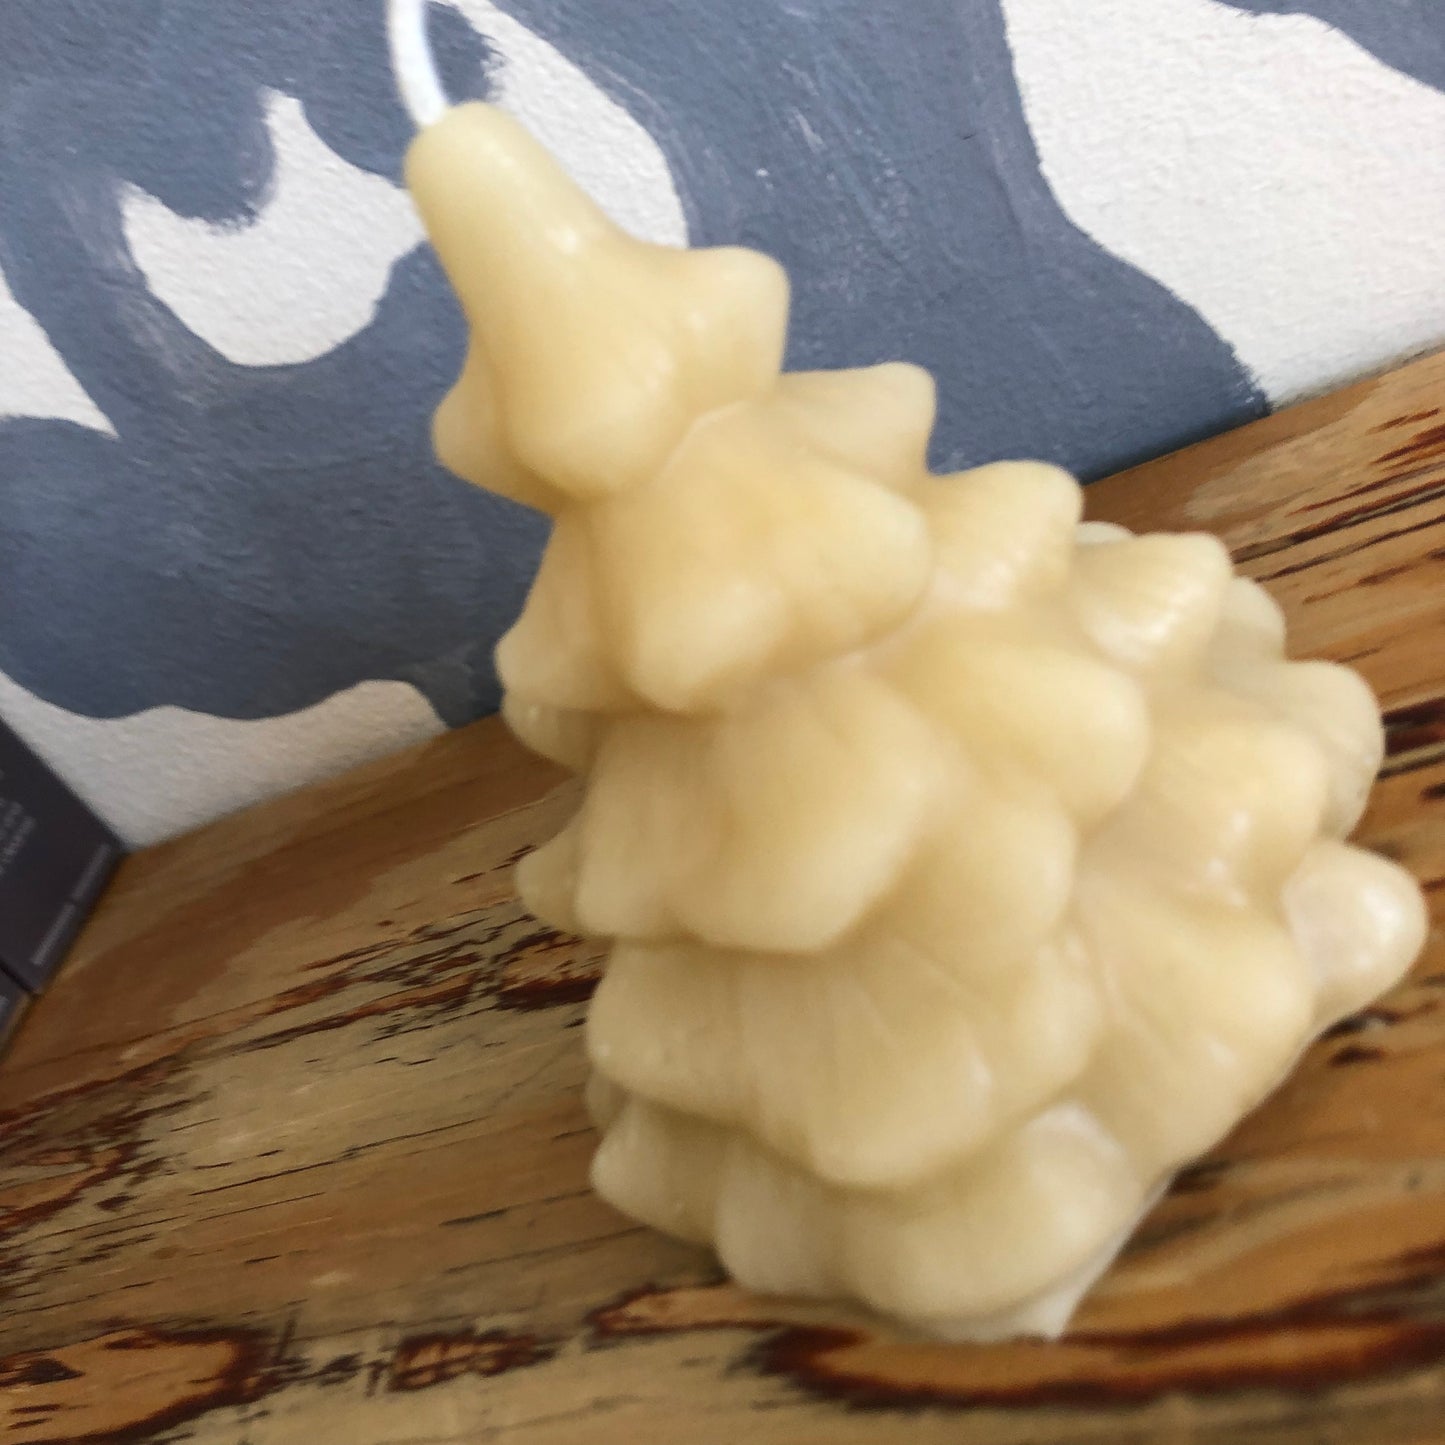 Candlestick Maker Beeswax Candle Pine Tree